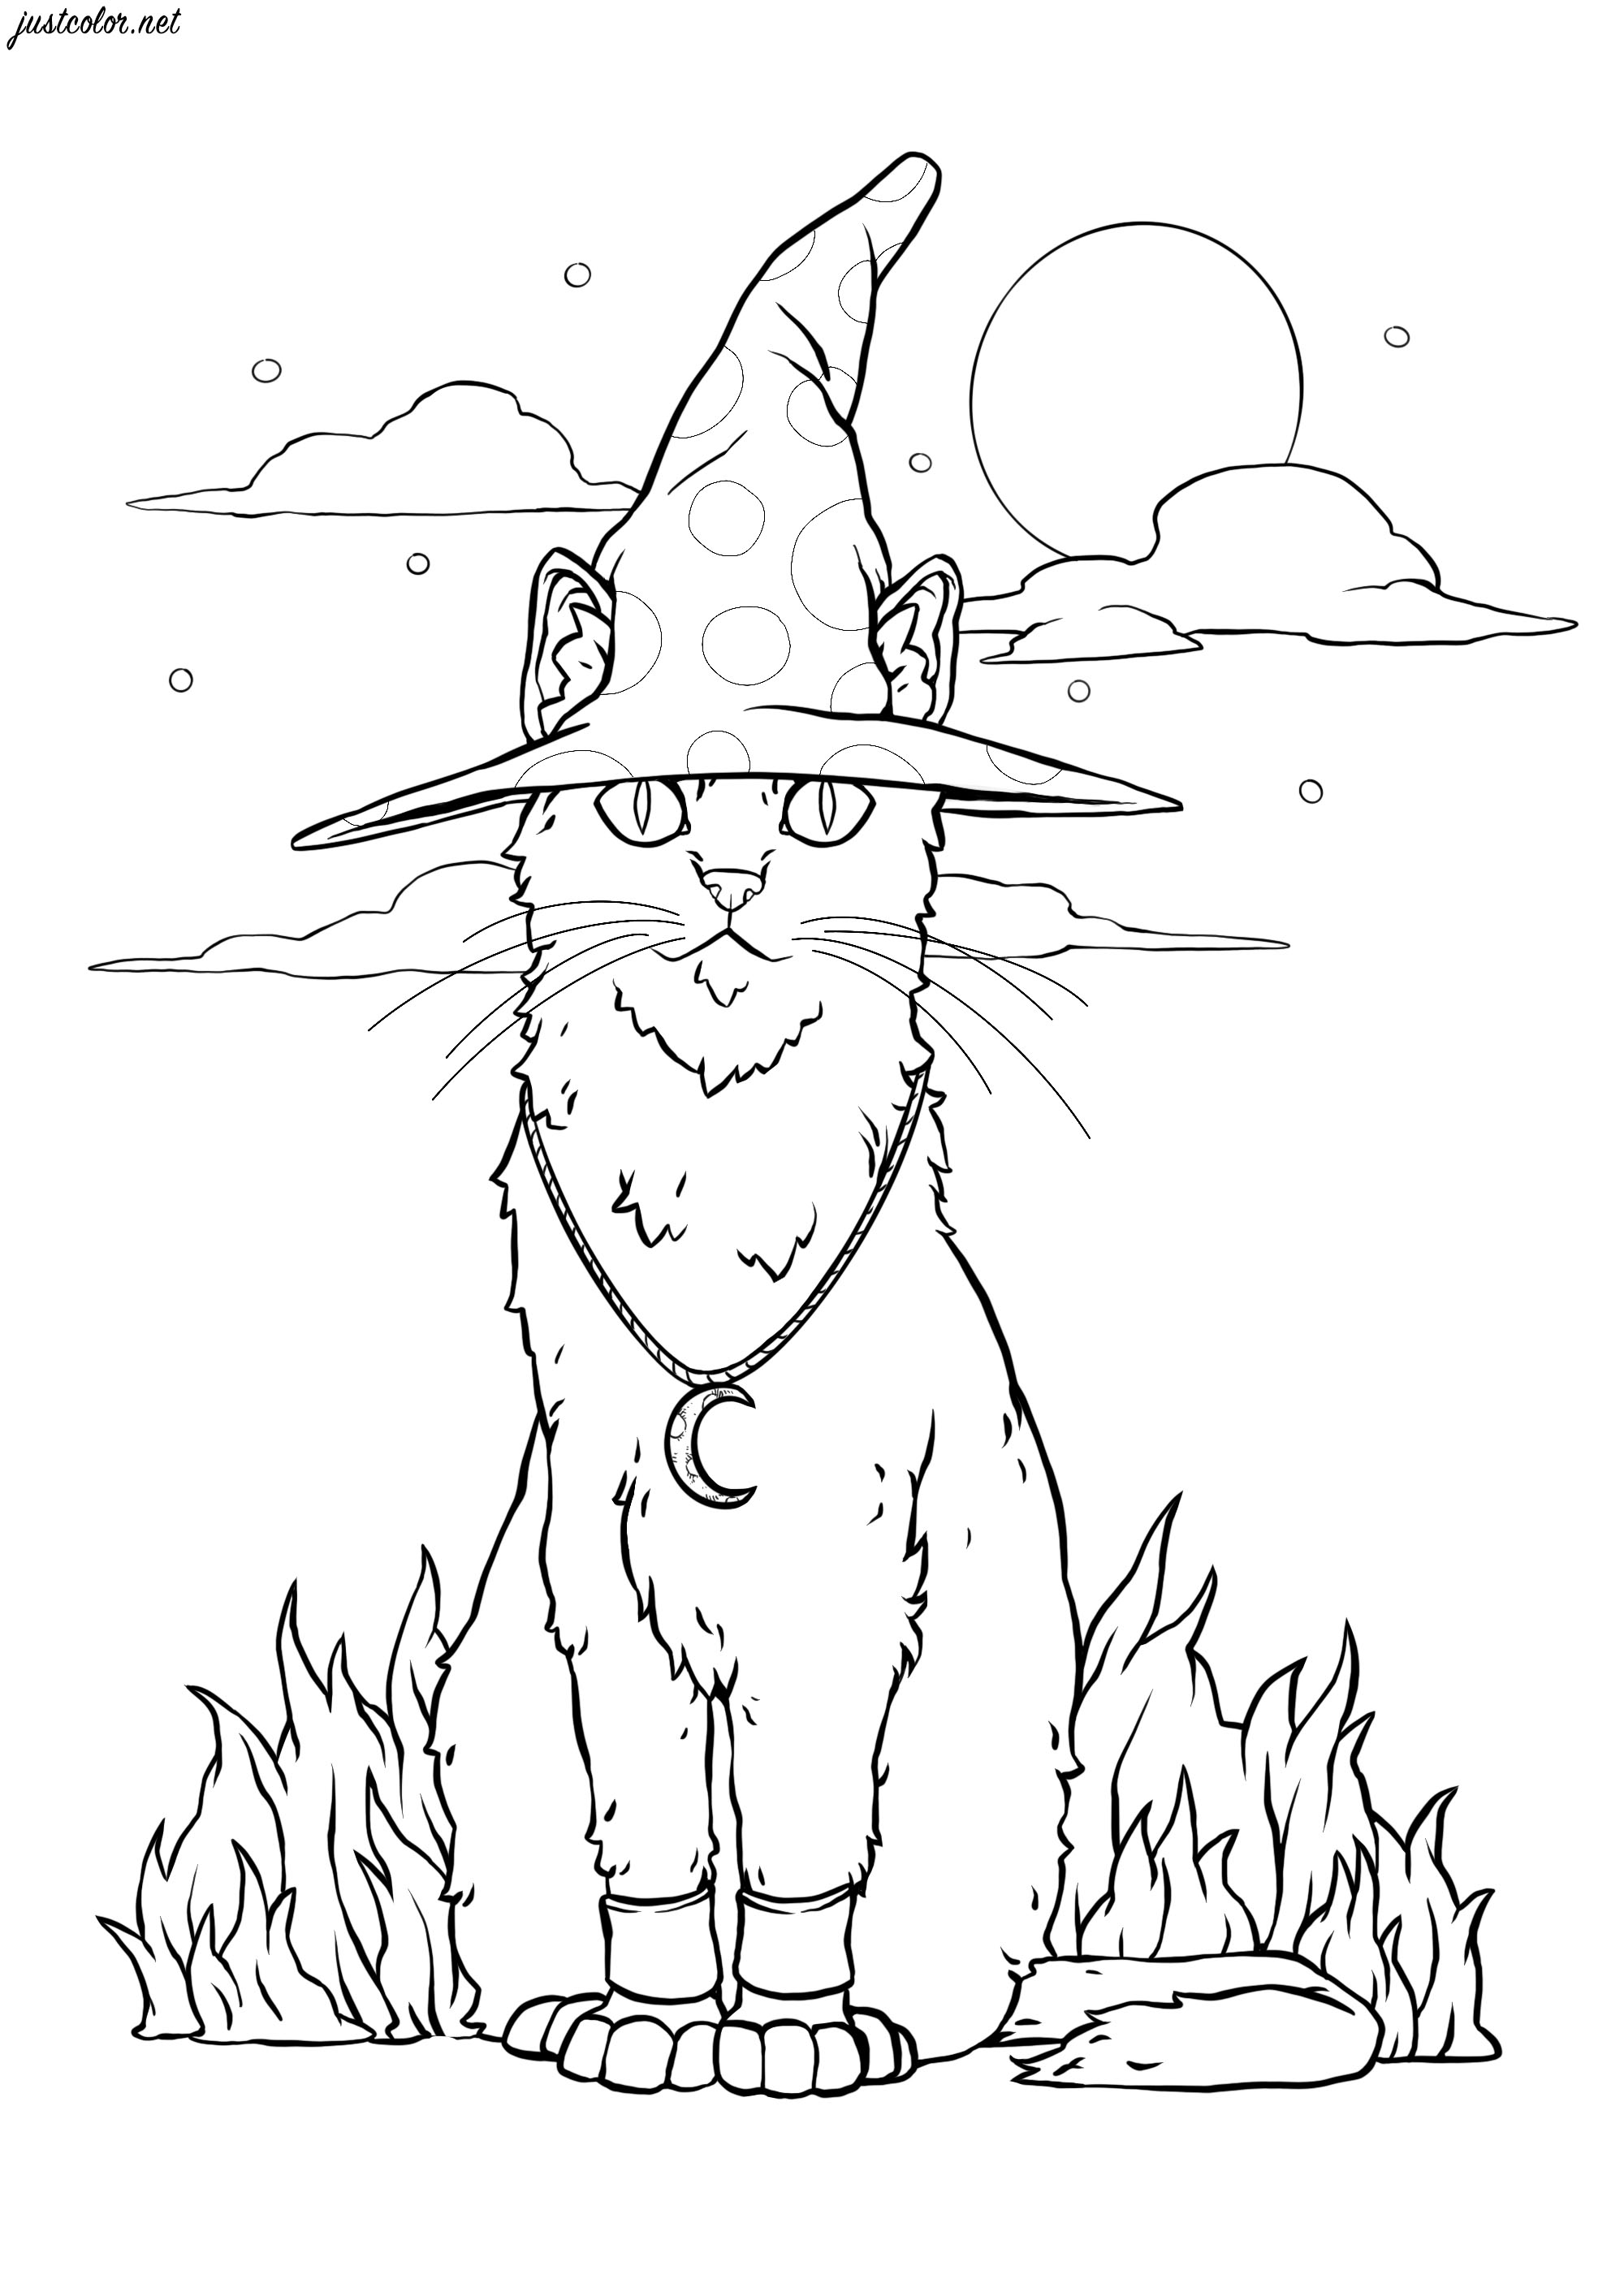 the-magical-cat-halloween-adult-coloring-pages